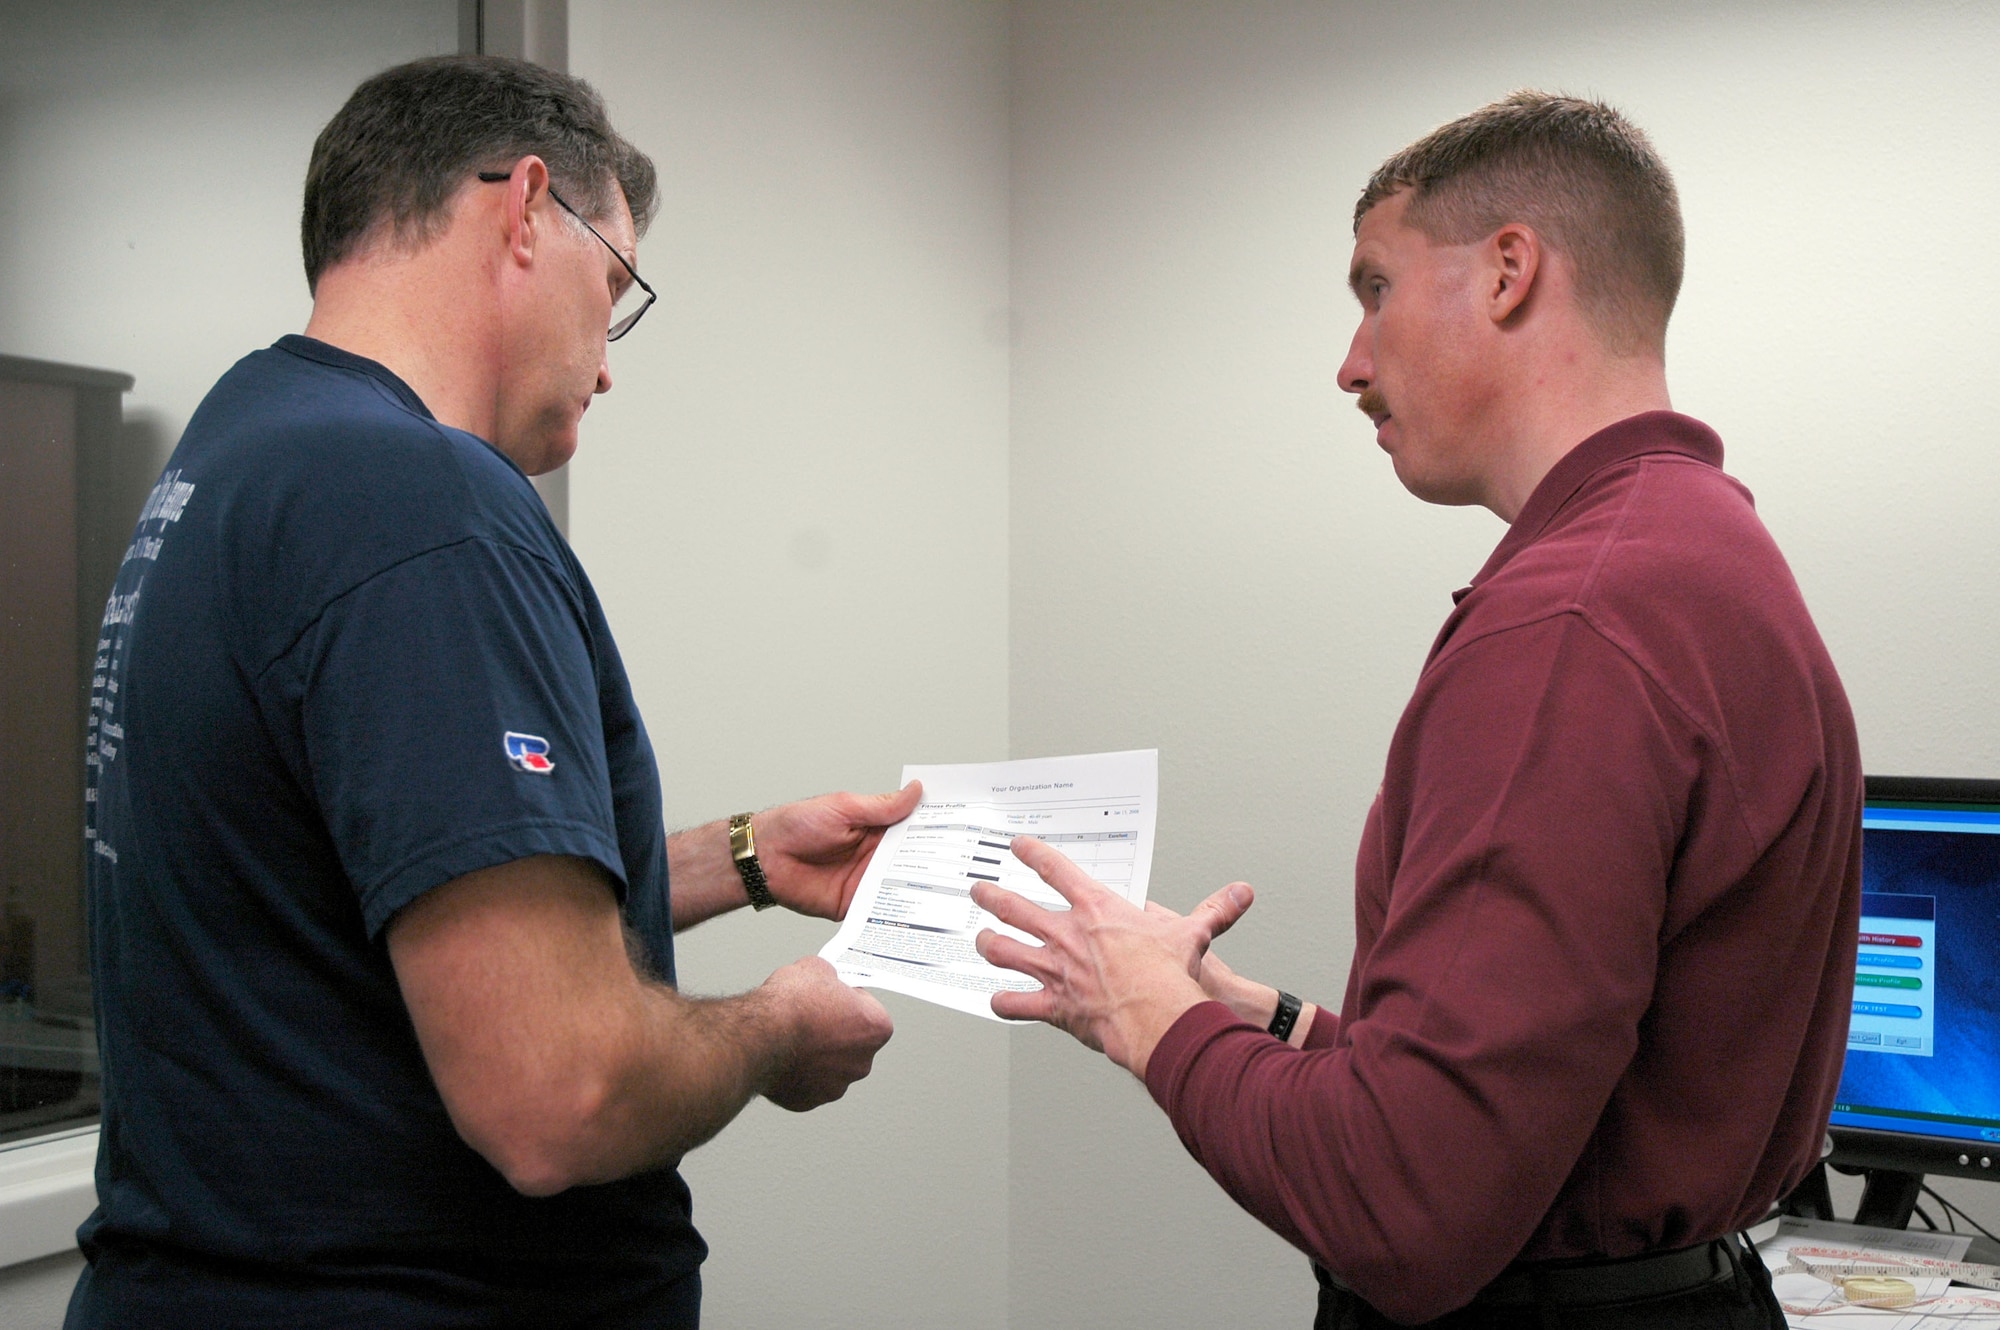 Kirk Clark, physiologist at the Health and Wellness Center, explains the results to Largest Loser participant Jerry Kain, after his initial assessment Jan. 15. Mr. Kain has agreed to be followed through the course of his participation in the program which will run until April 4. (U.S. Air Force photo/Valerie Mullett)